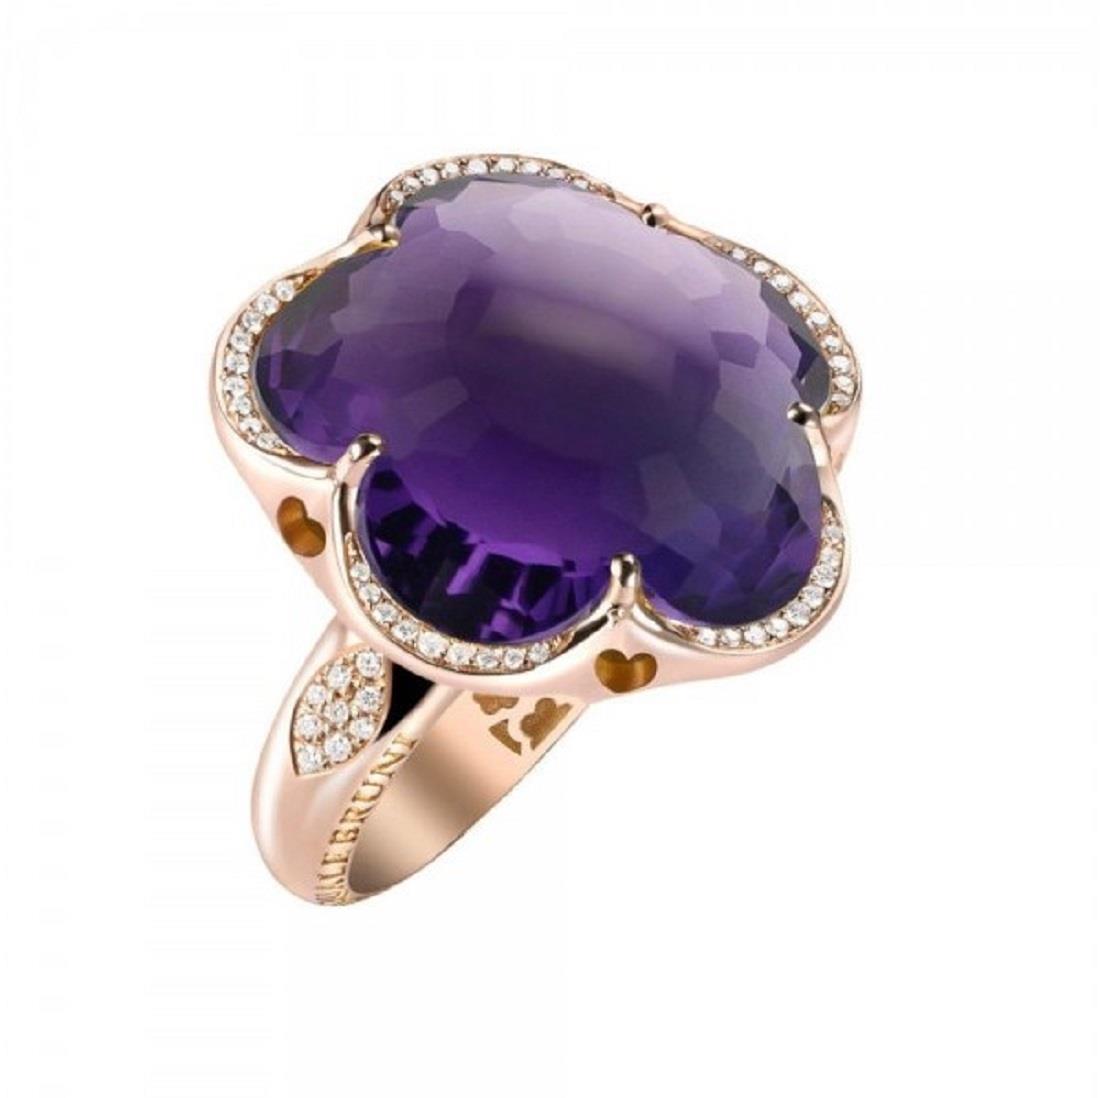 Bon Ton flower ring in red gold with amethyst and diamonds - PASQUALE BRUNI